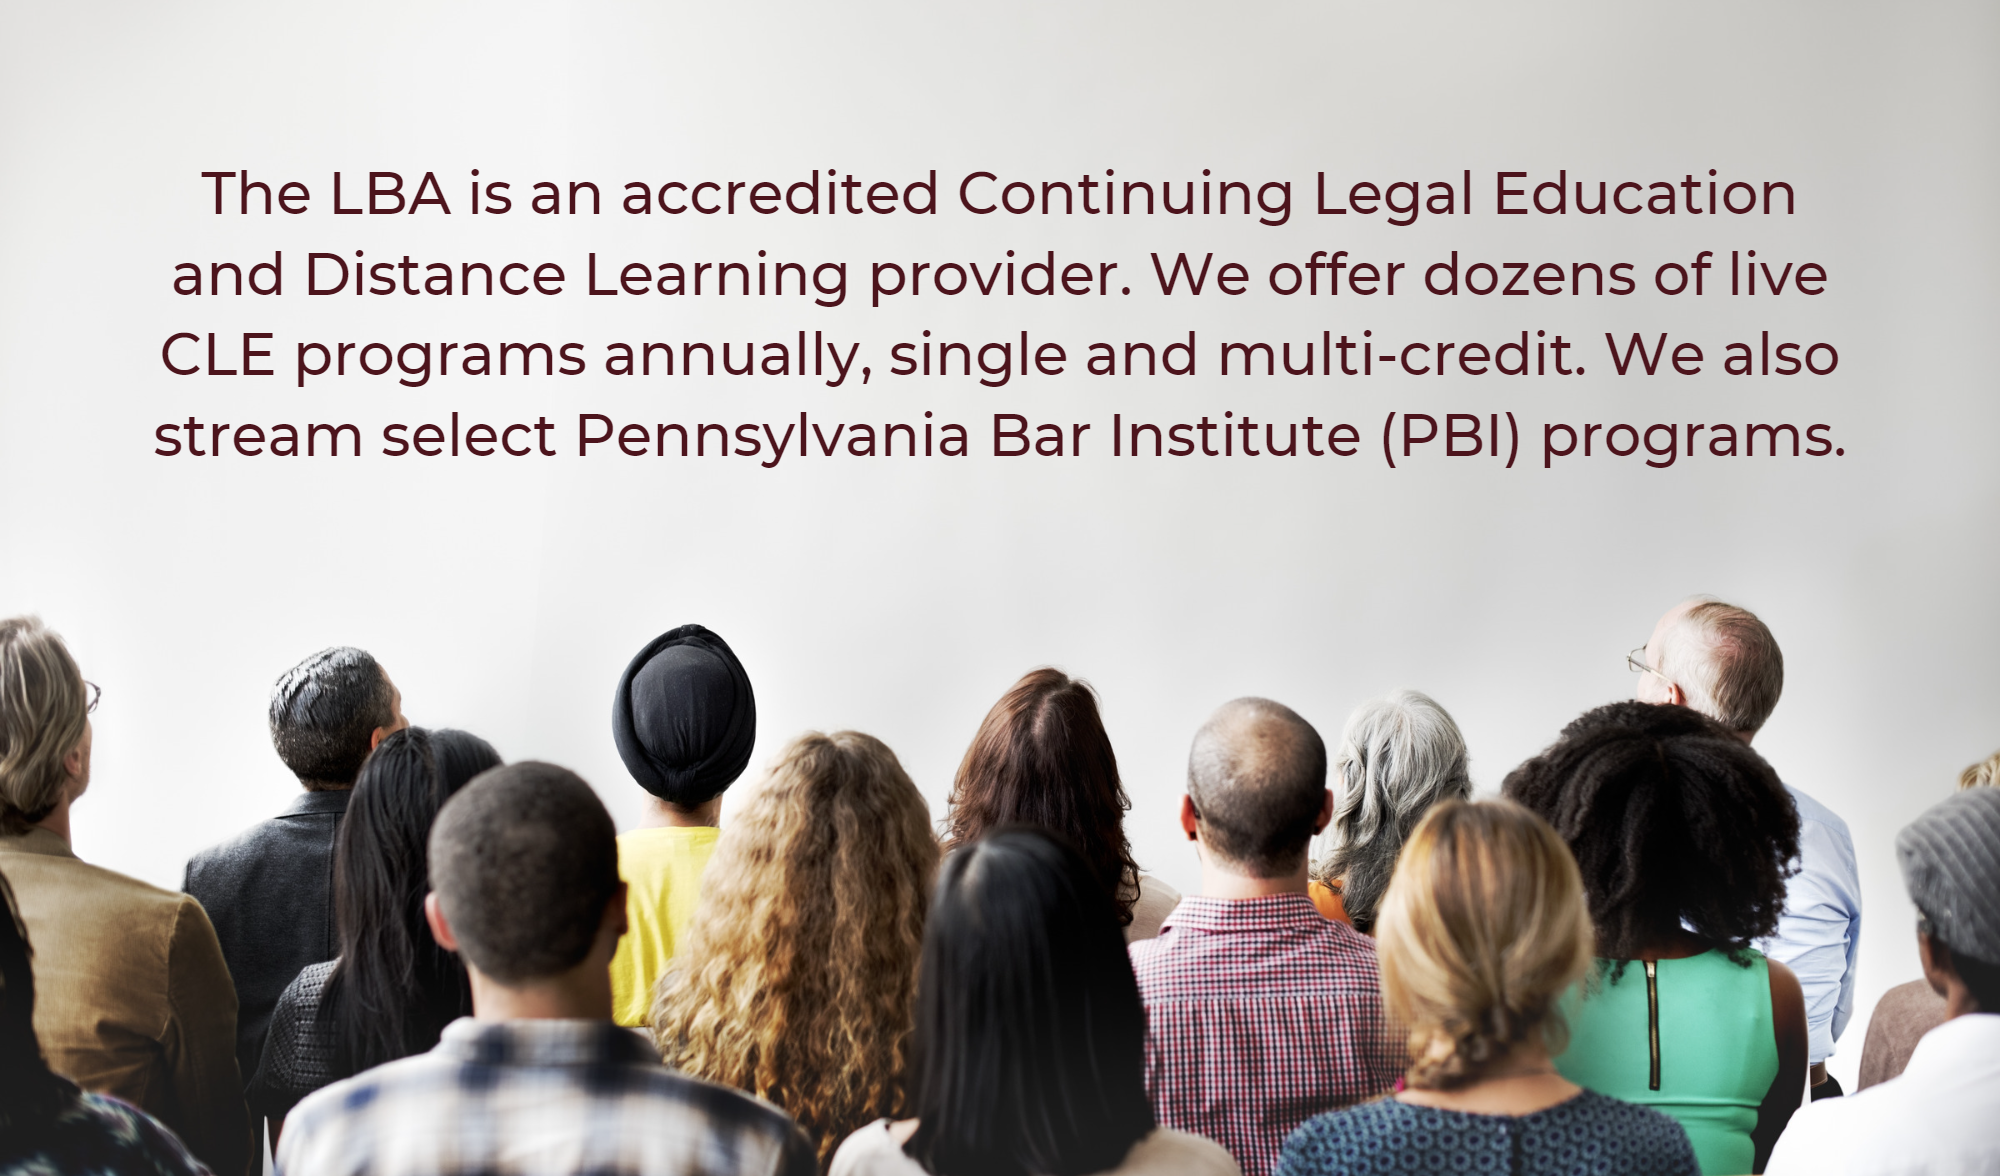 Audience in front of blank wall with text: The LBA is an accredited Continuing Legal Education and Distance Learning provider. We offer dozens of live CLE programs annually, single- and multi-credit. We also stream select Pennsylvania Bar Institute (PBI) programs.